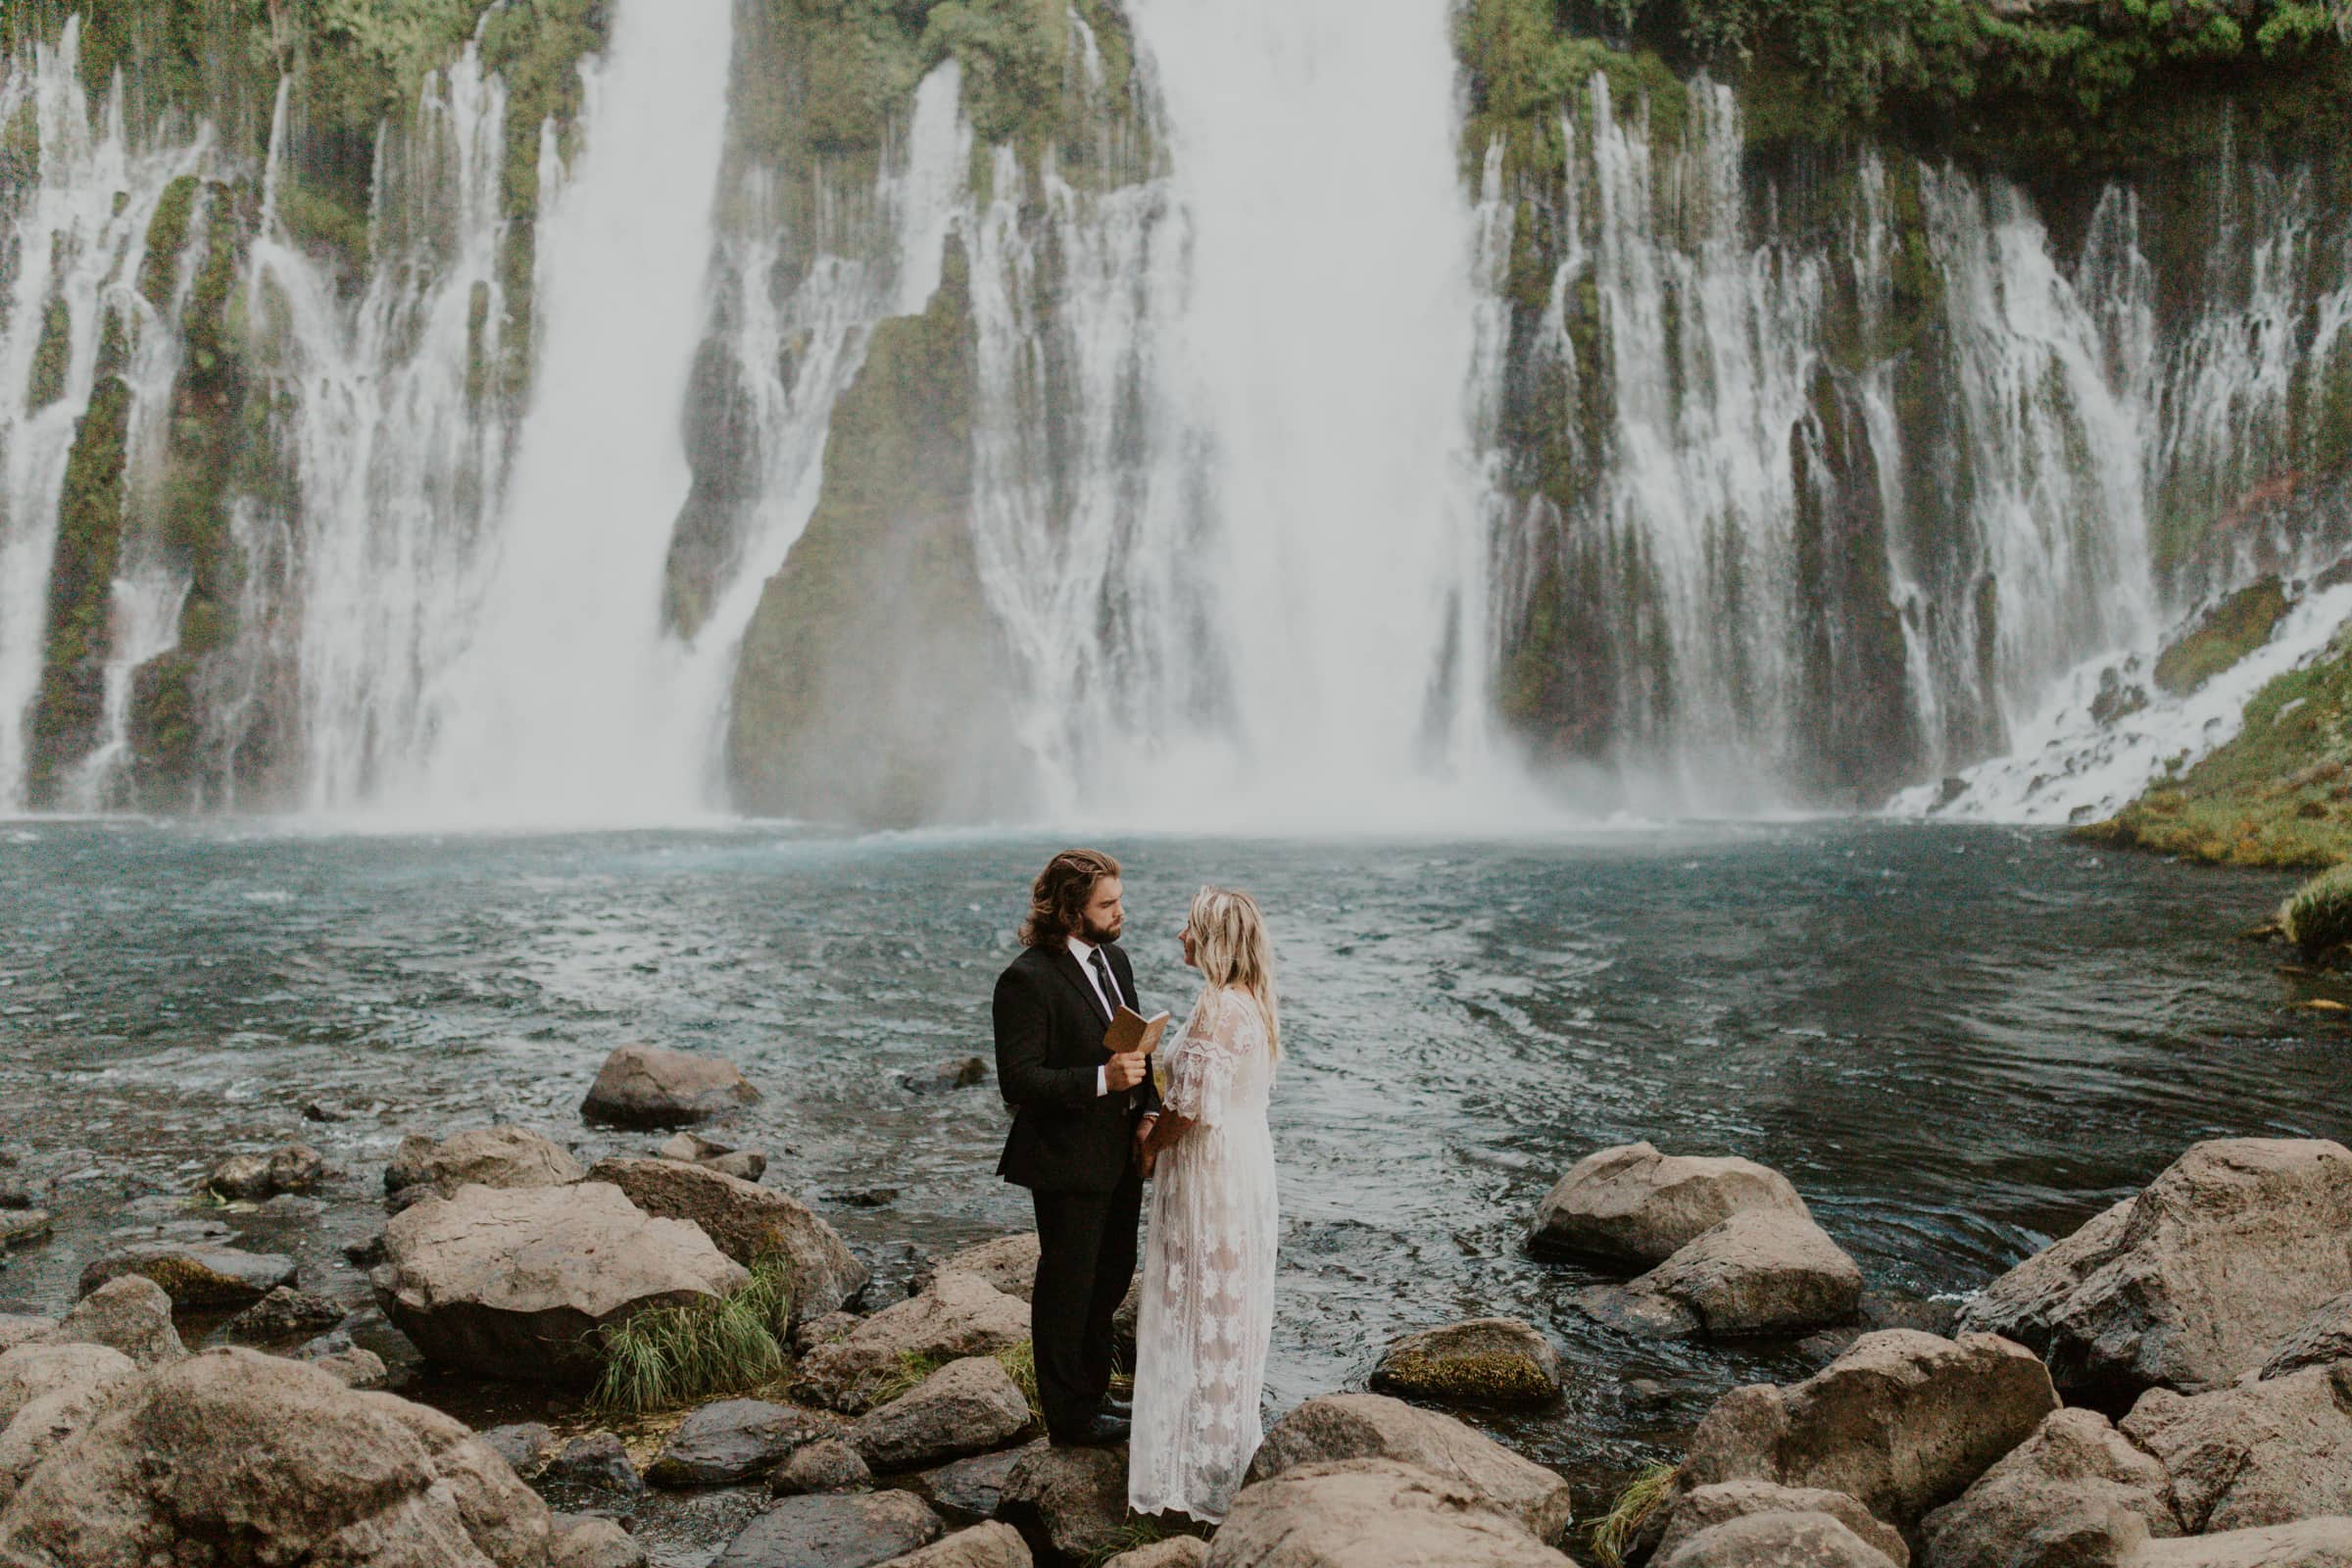 A groom reading his vows in front of a waterfall on the couples wedding day.